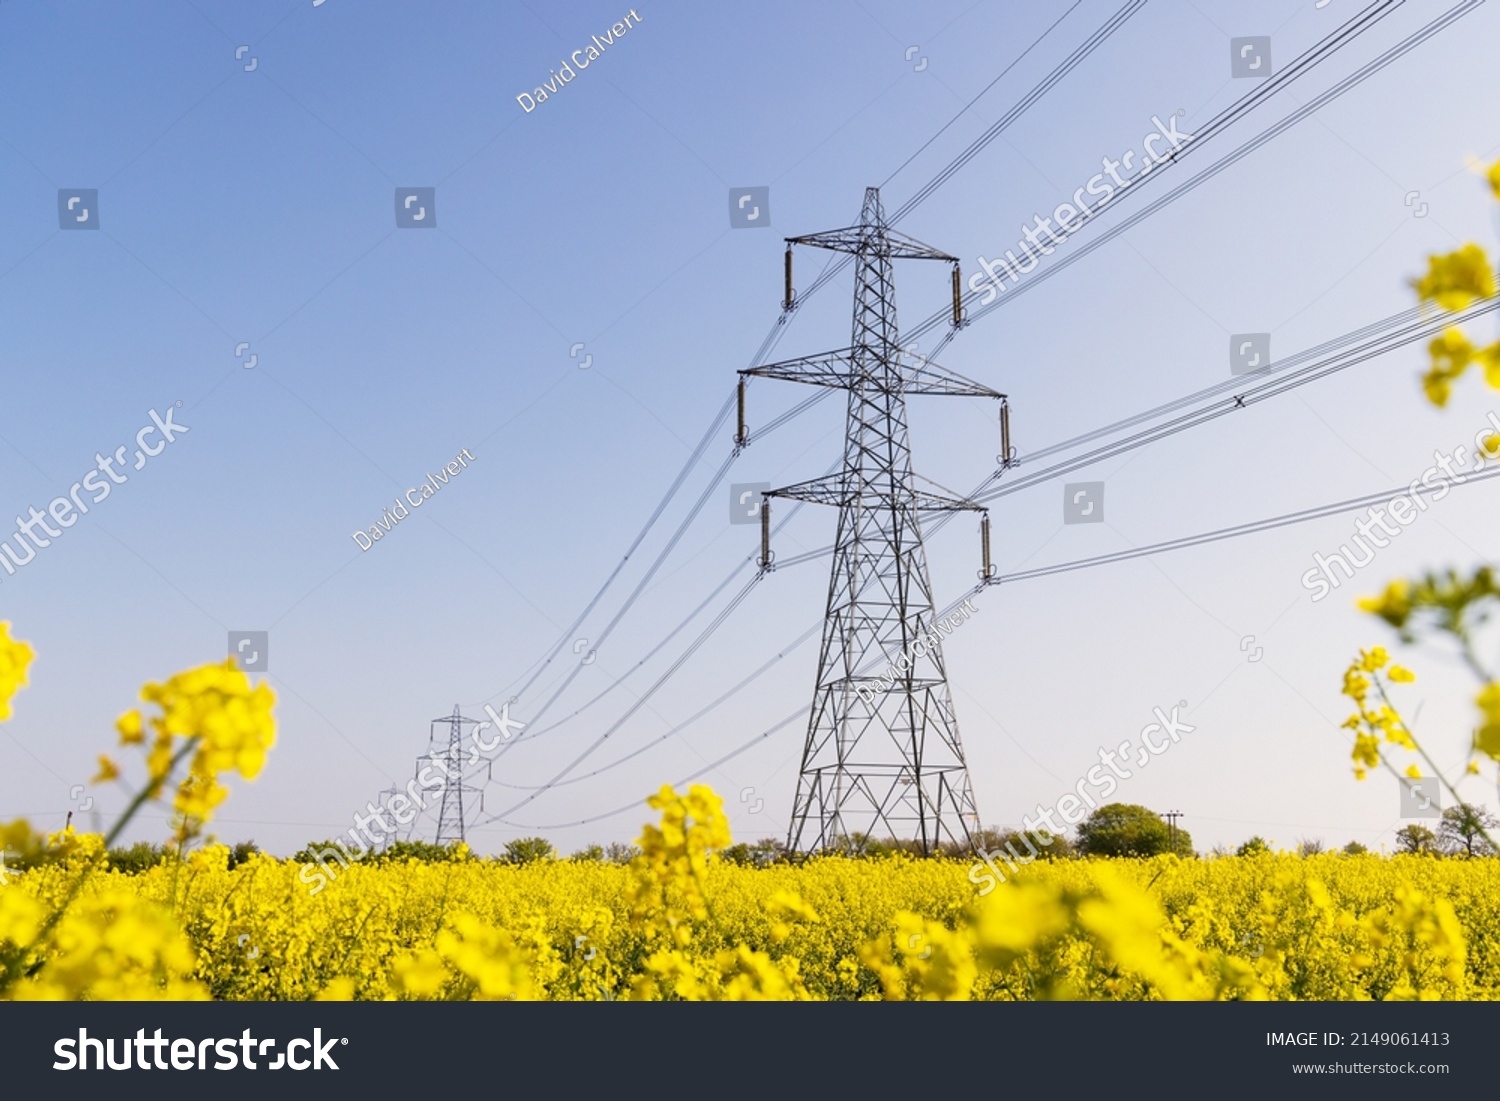 Electricity pylons in a field of rape seed flowers in full bloom on a sunny day. Hertfordshire, UK #2149061413